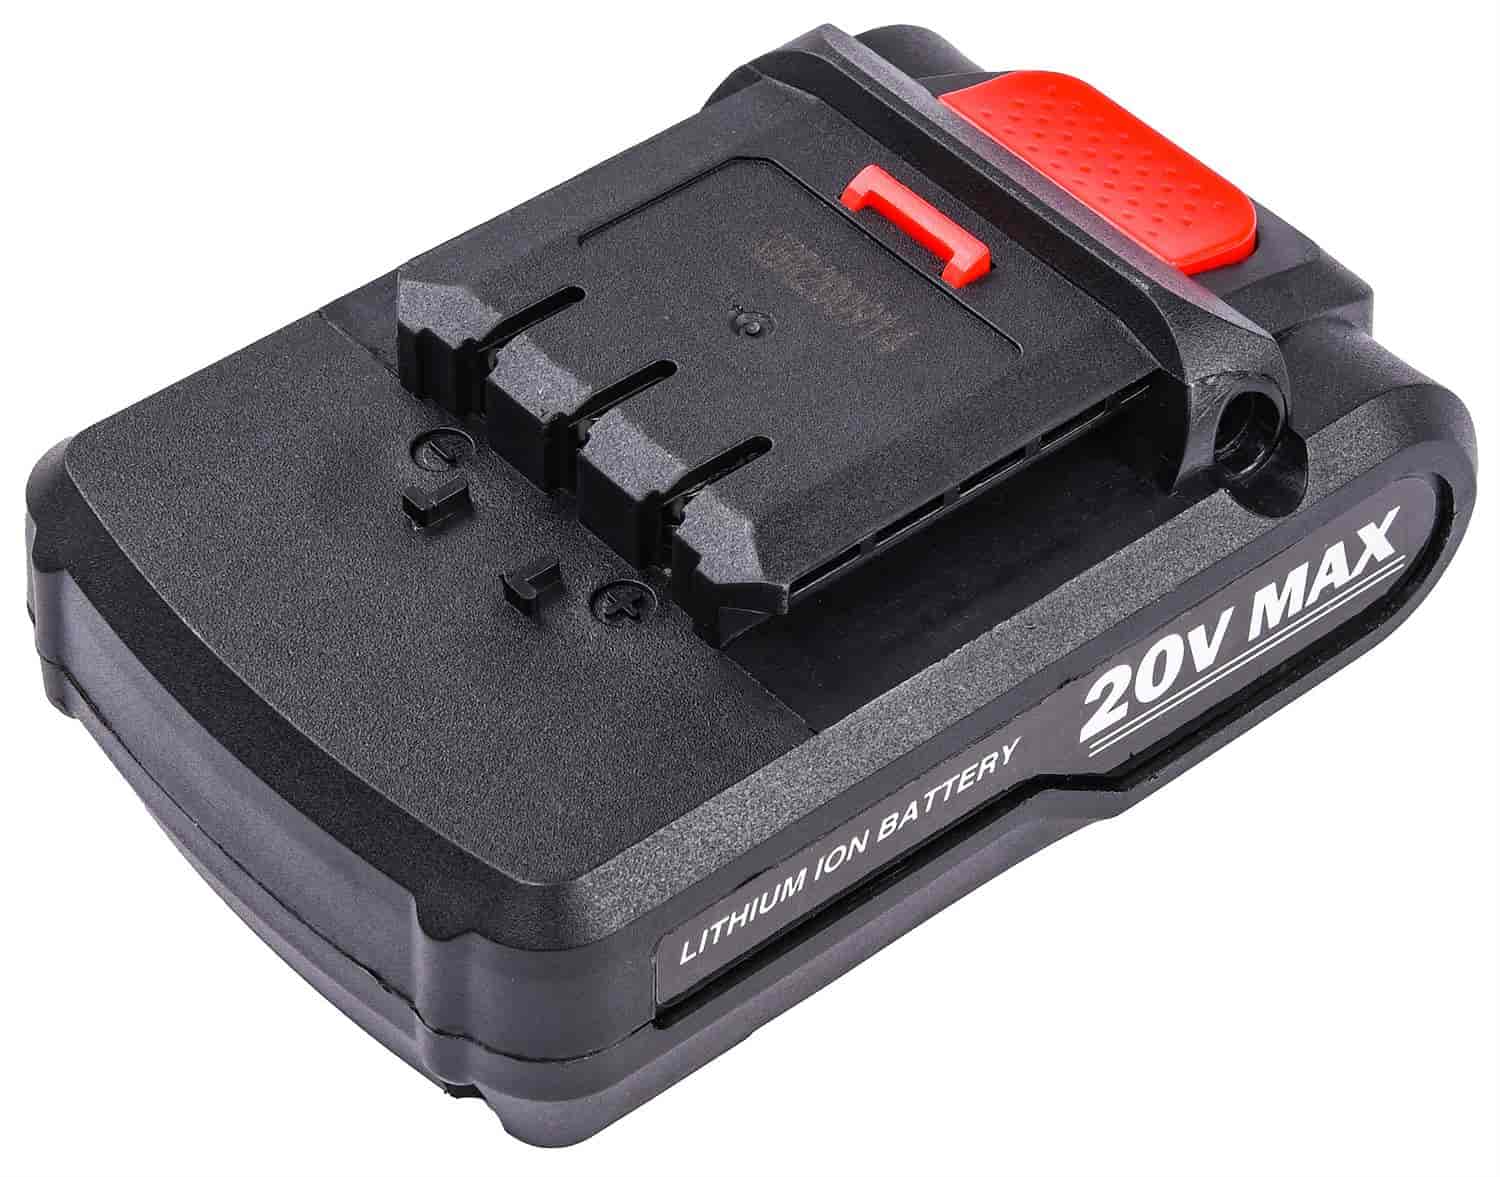 Replacement 20-Volt Max Battery for 555-81026 Cordless Grease